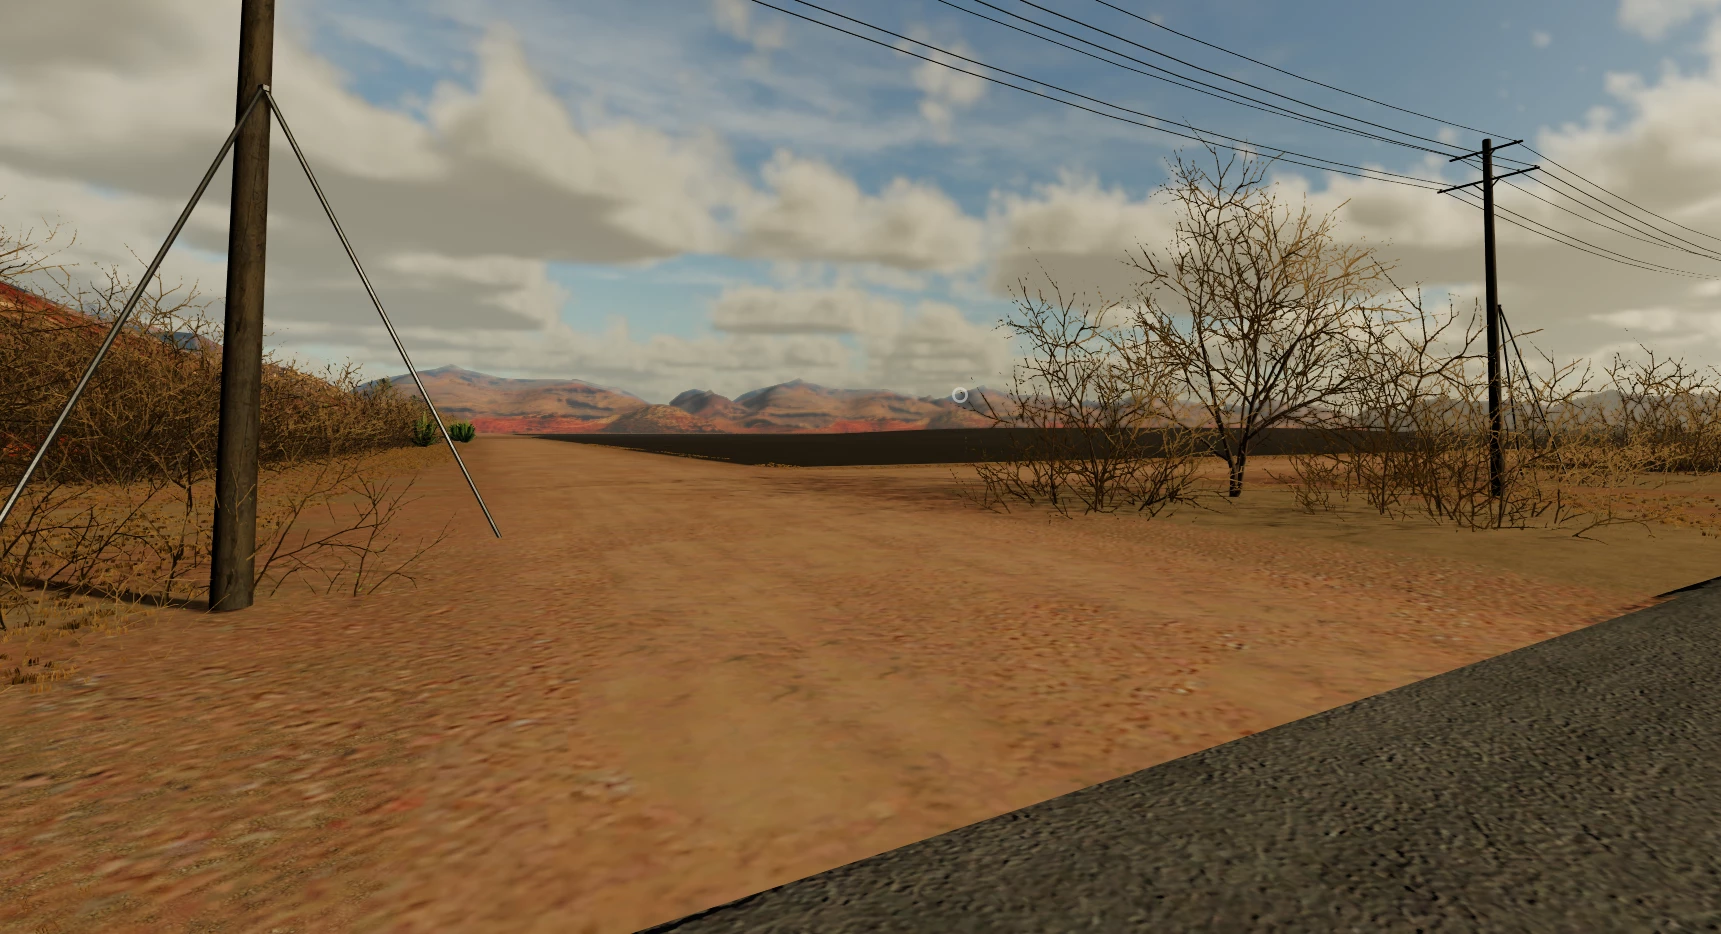 Central Outback 4x map.